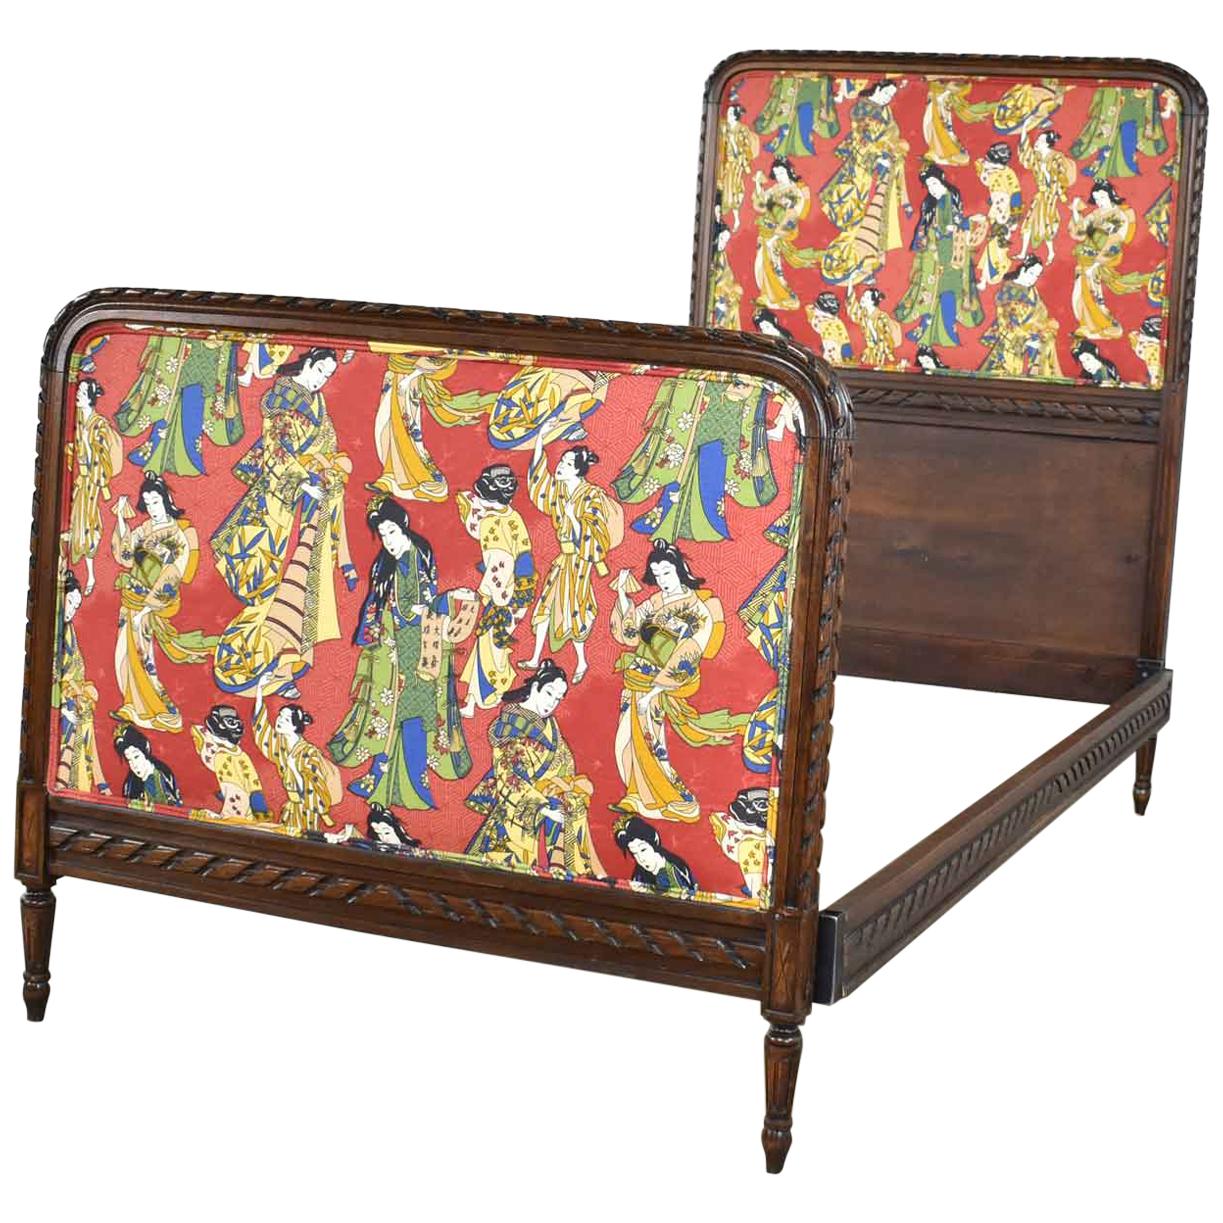 Antique French Carved Walnut and Upholstered Twin Bed with Asian Figural Fabric For Sale